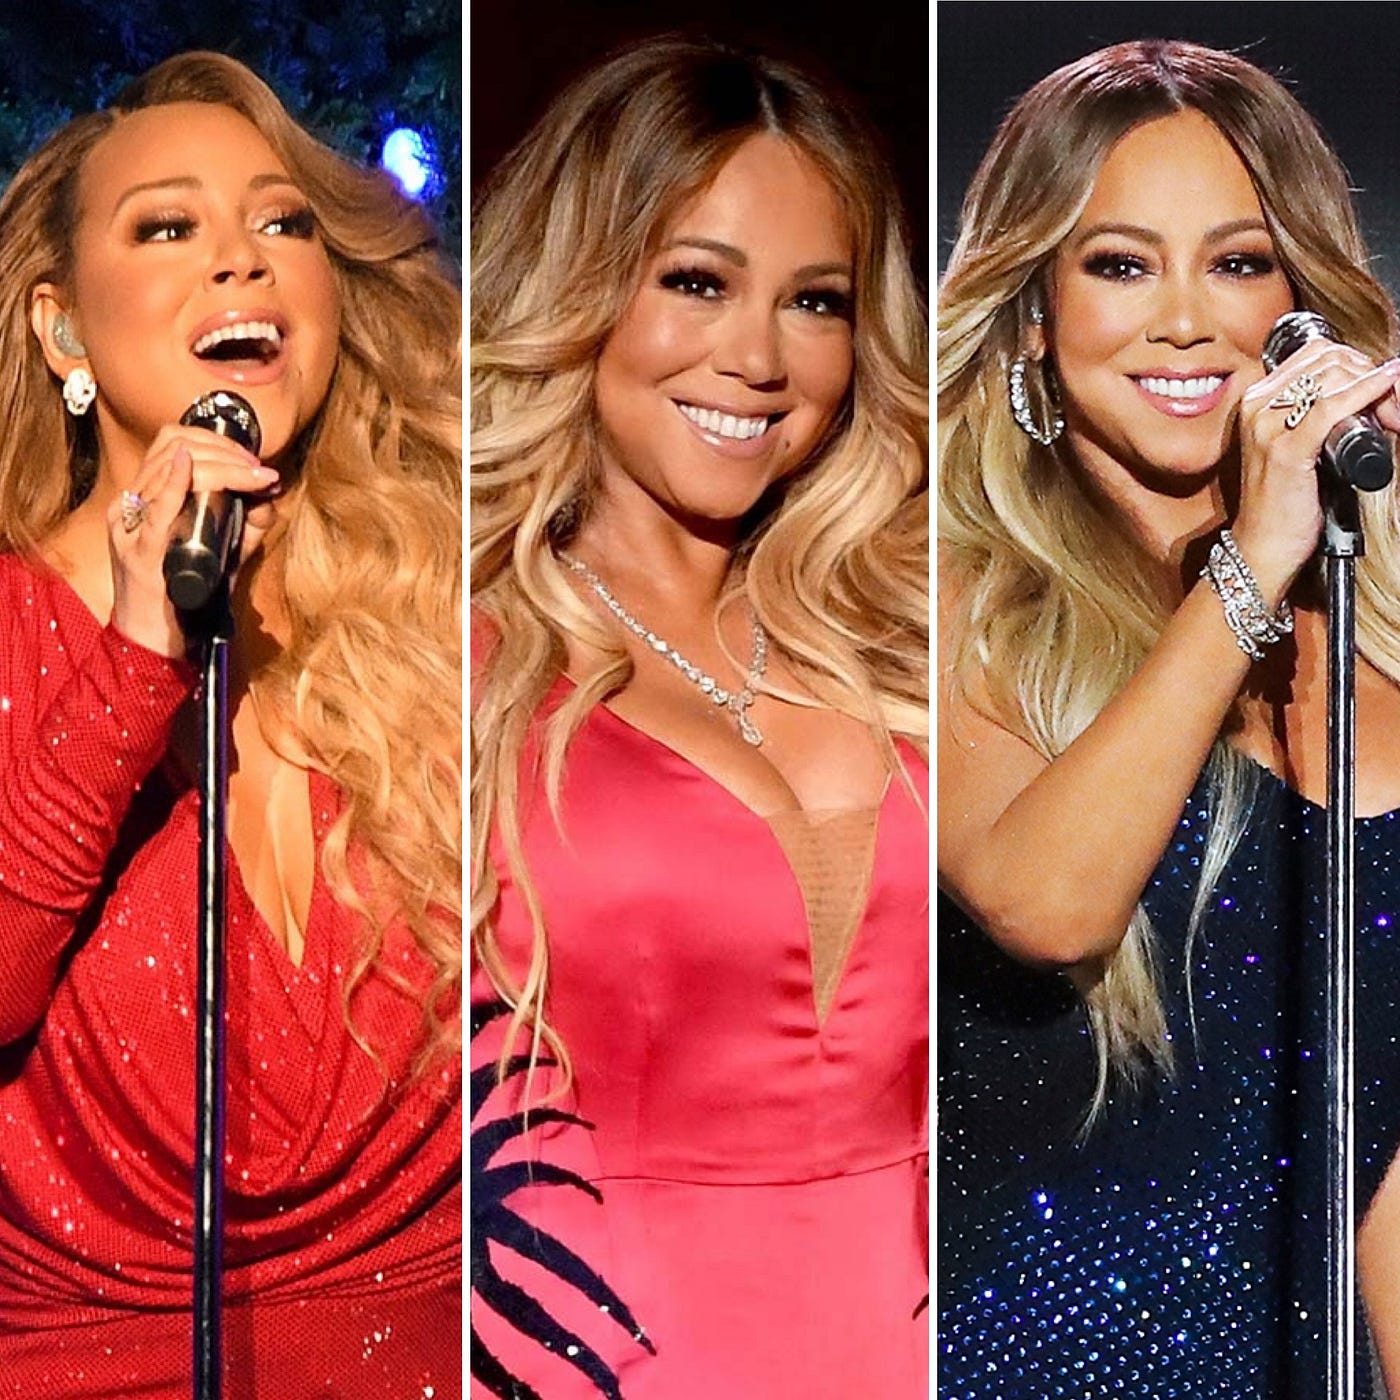 25 Reasons Why We're So Obsessed With Mariah Carey's Style